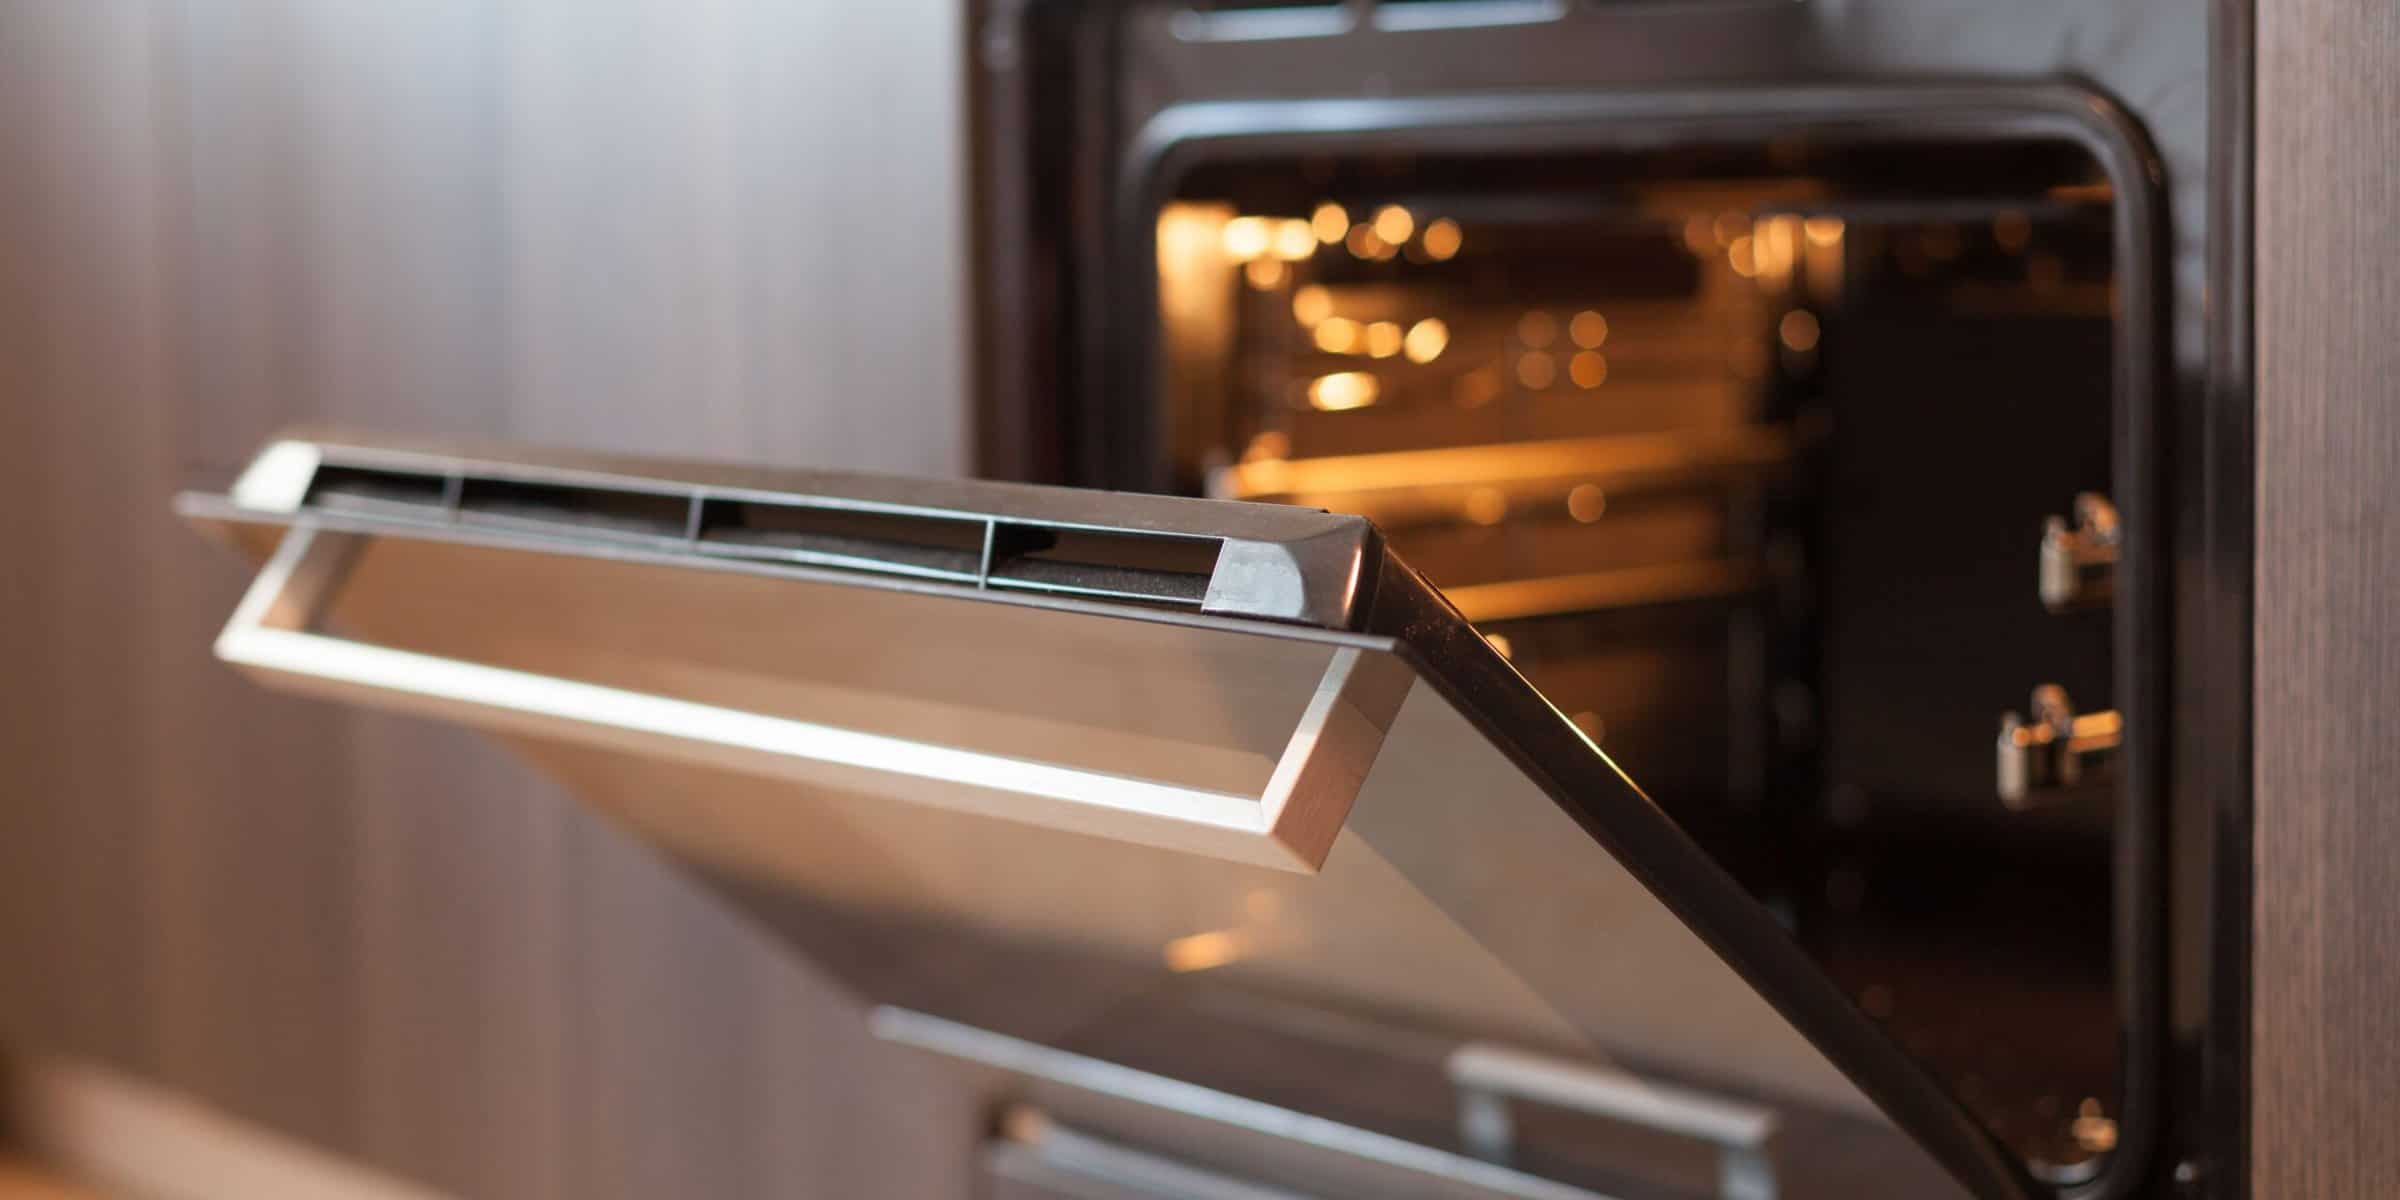 How To Clean A Self Cleaning Oven Without Using The Self Cleaning Feature